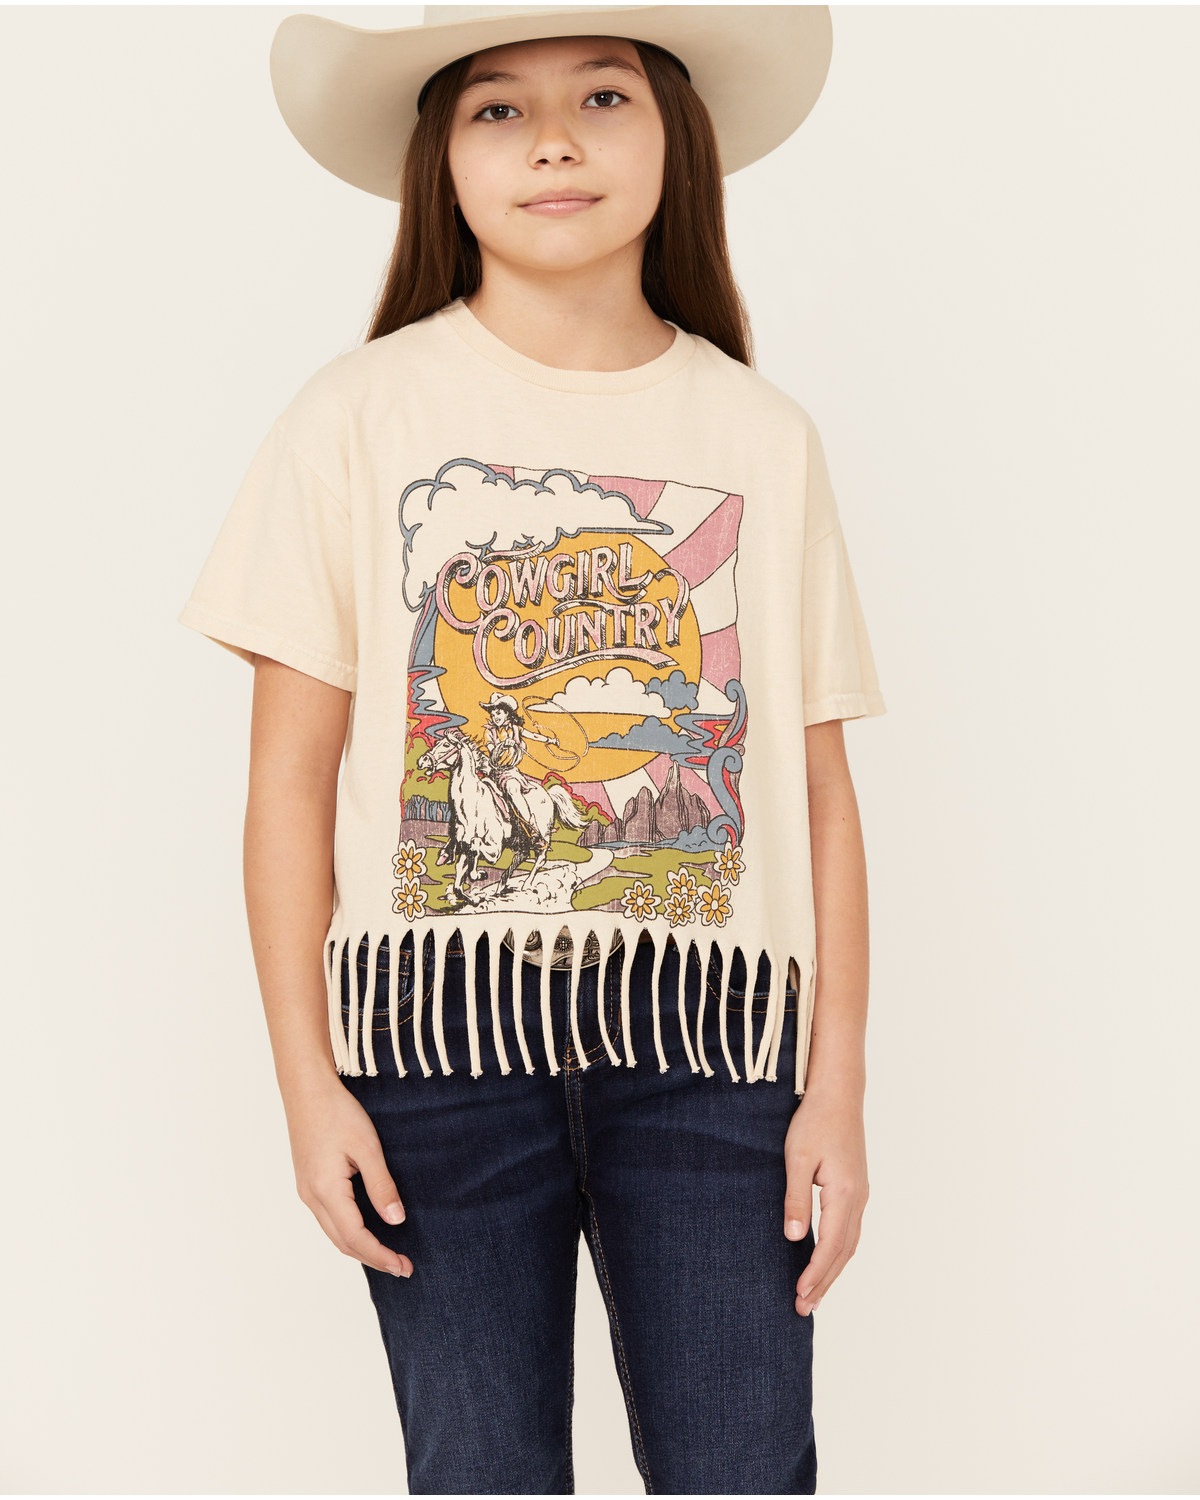 American Highway Girls' Cowgirl Country Short Sleeve Fringe Graphic Tee